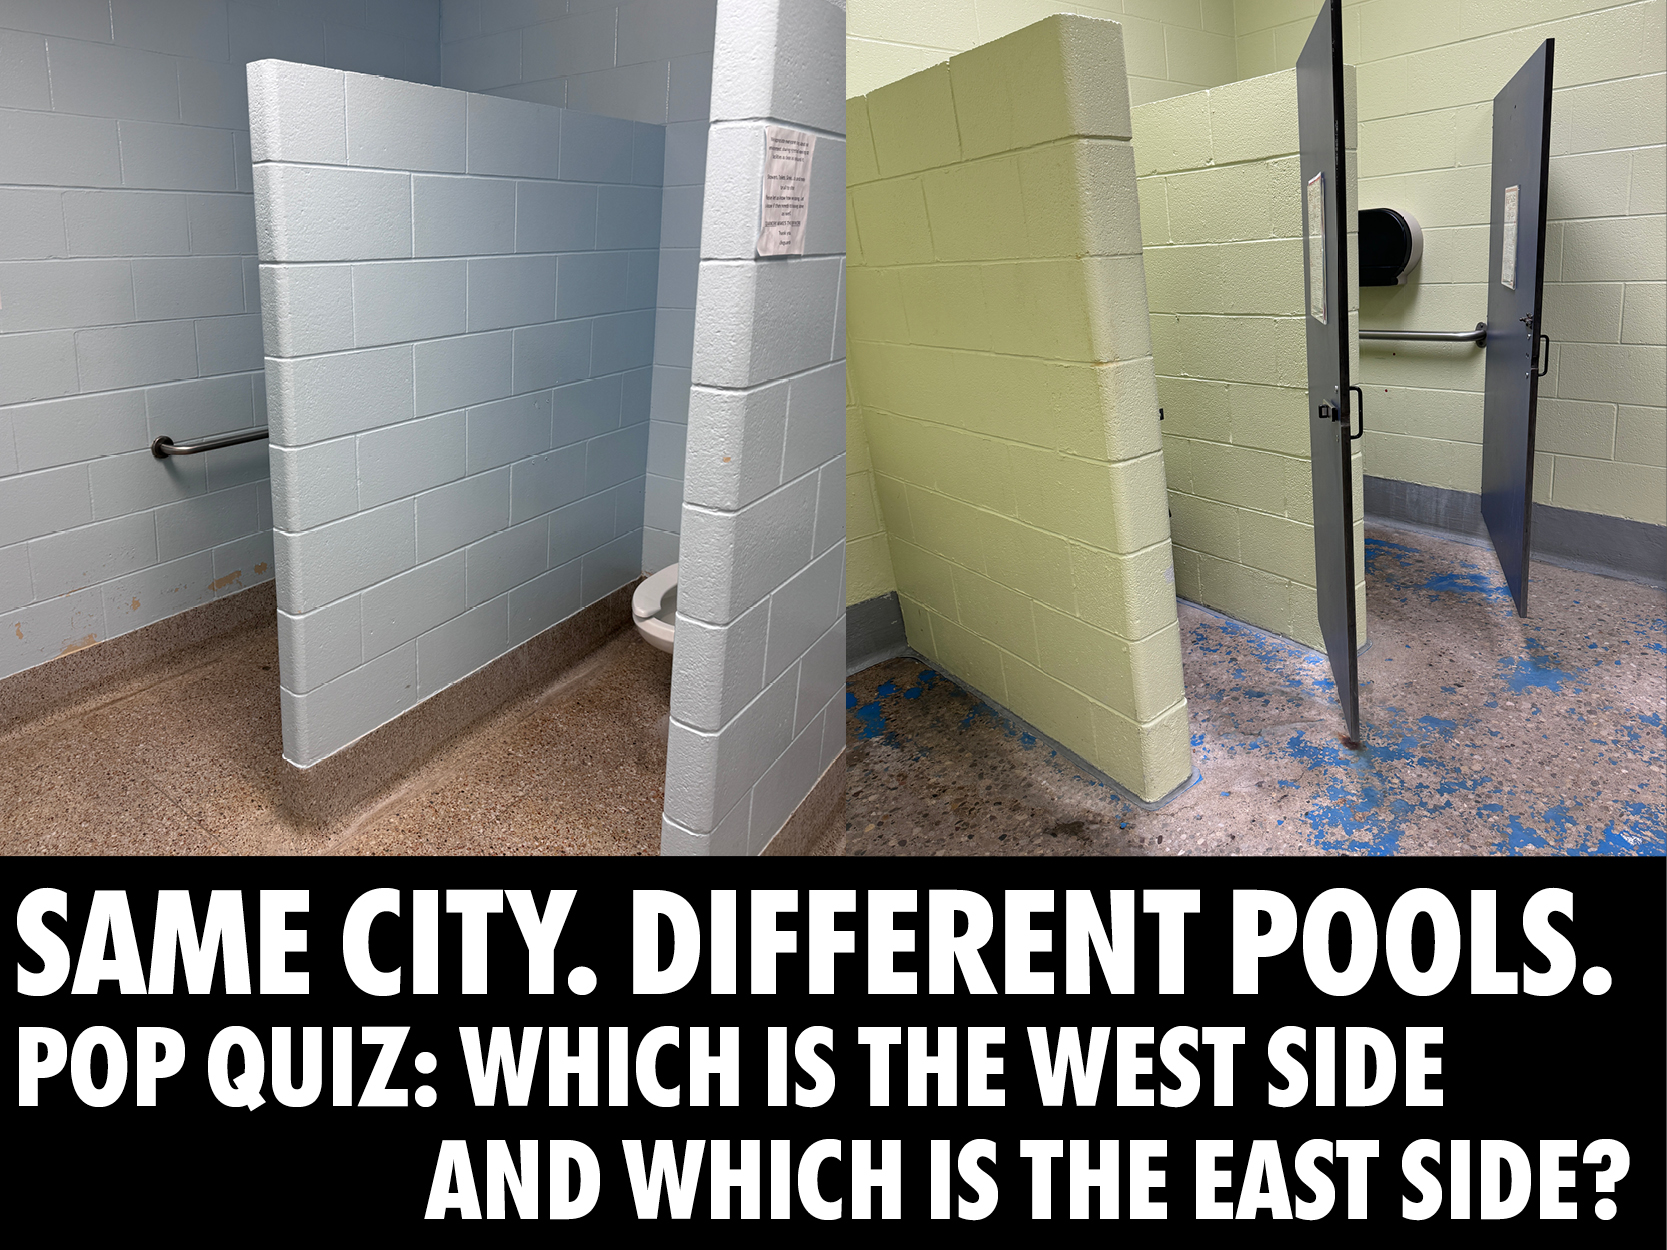 The City of Dayton has two pools on two sides of town. Which bathroom is on the east side and which is on the west side?